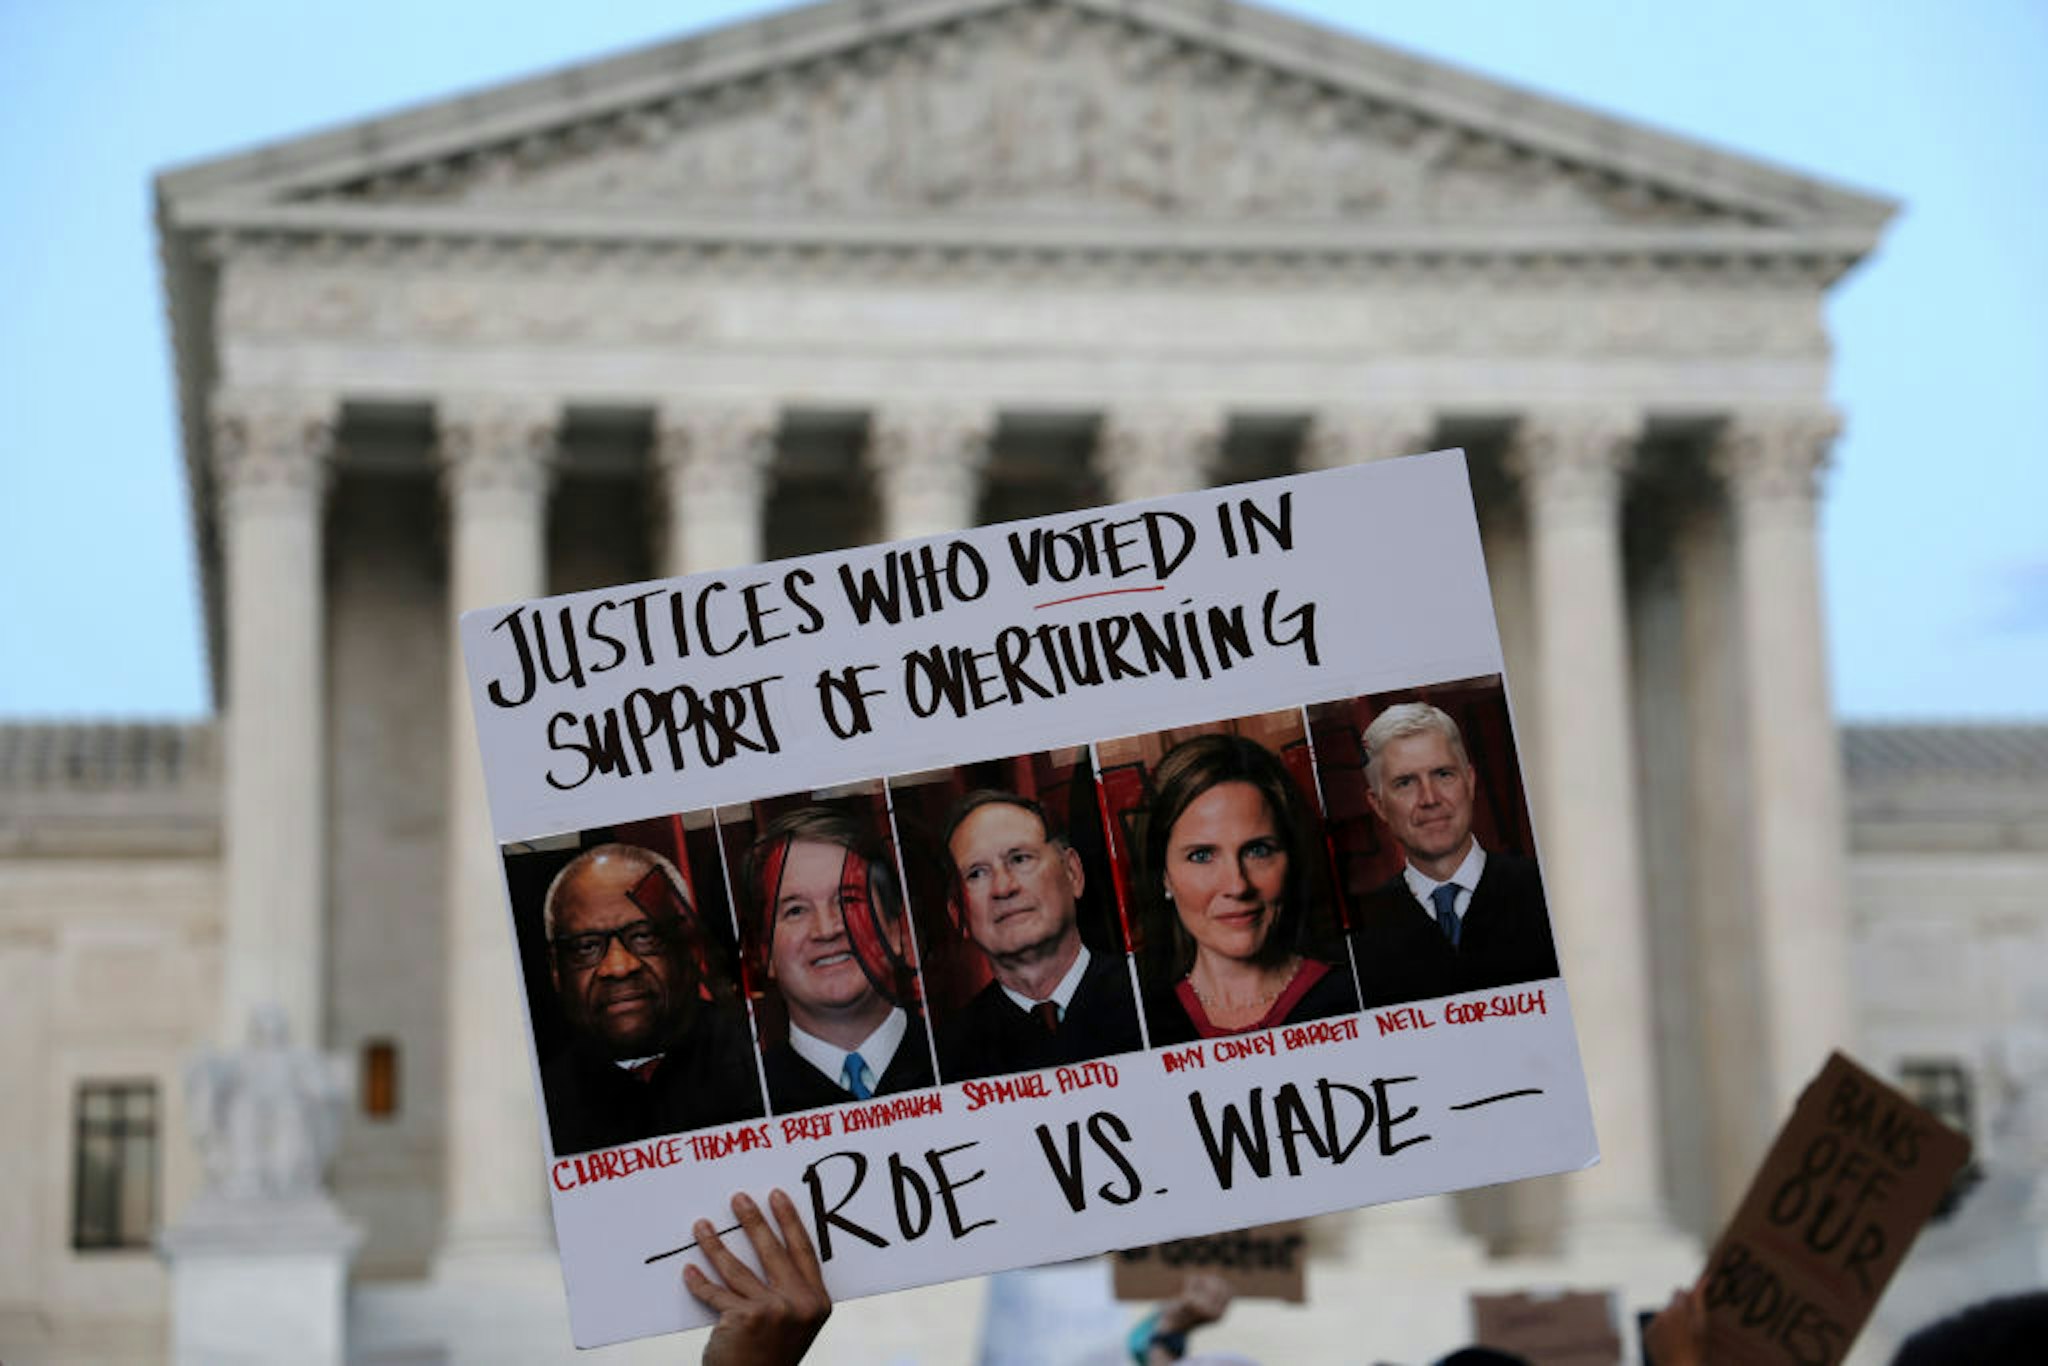 WASHINGTON, DC - MAY 03: A pro-choice activist holds up a sign during a rally in front of the U.S. Supreme Court in response to the leaked Supreme Court draft decision to overturn Roe v. Wade May 3, 2022 in Washington, DC. In a leaked initial draft majority opinion obtained by Politico and authenticated by Chief Justice John Roberts, Supreme Court Justice Samuel Alito wrote that the cases Roe v. Wade and Planned Parenthood of Southeastern Pennsylvania v. Casey should be overturned, which would end federal protection of abortion rights across the country.